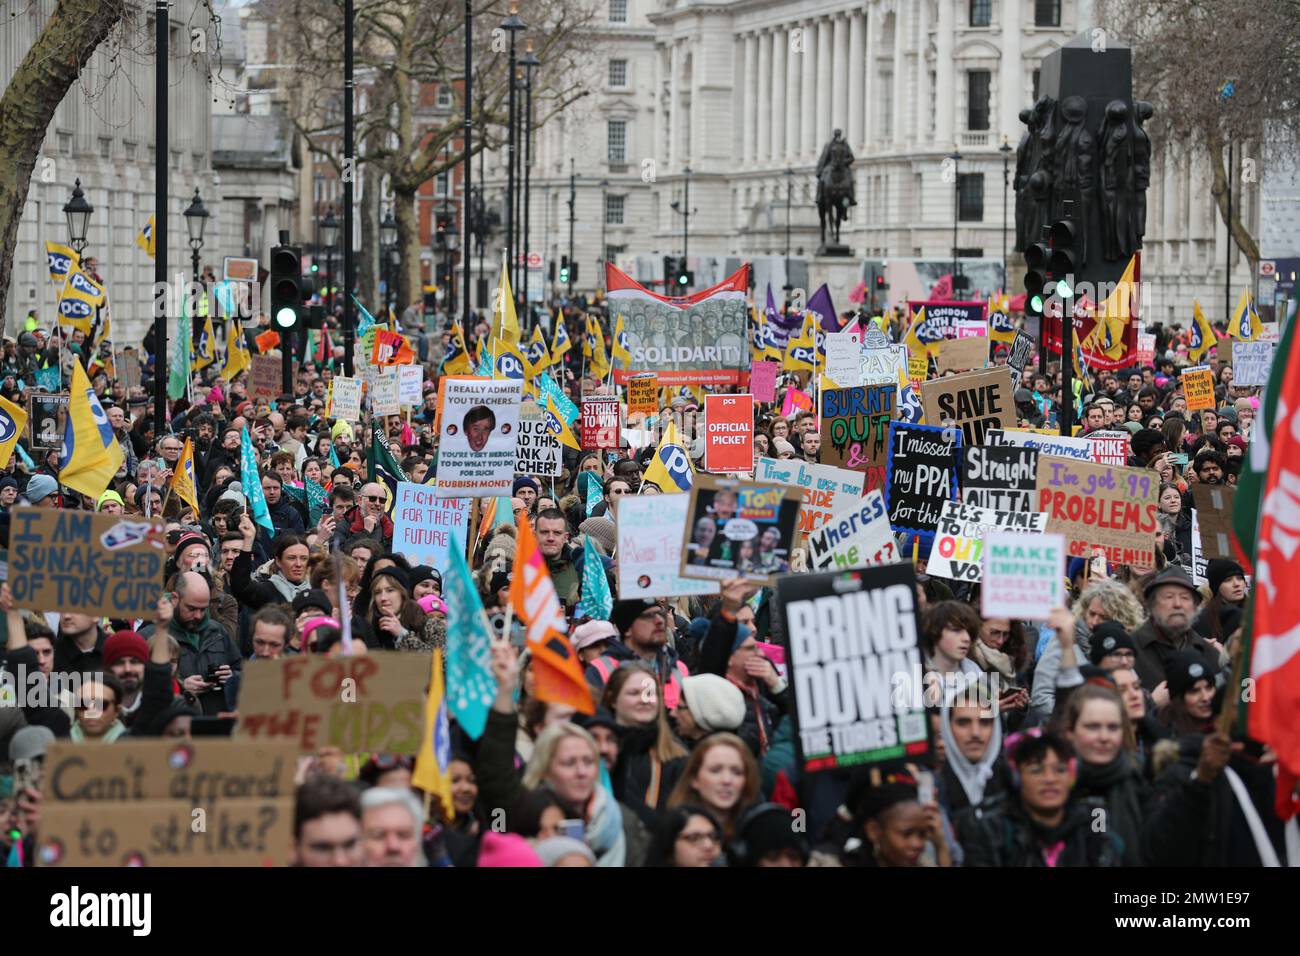 LONDON, 1st February 2023, 40,000 striking union members march through London in protest over pay, job conditions and funding. Stock Photo